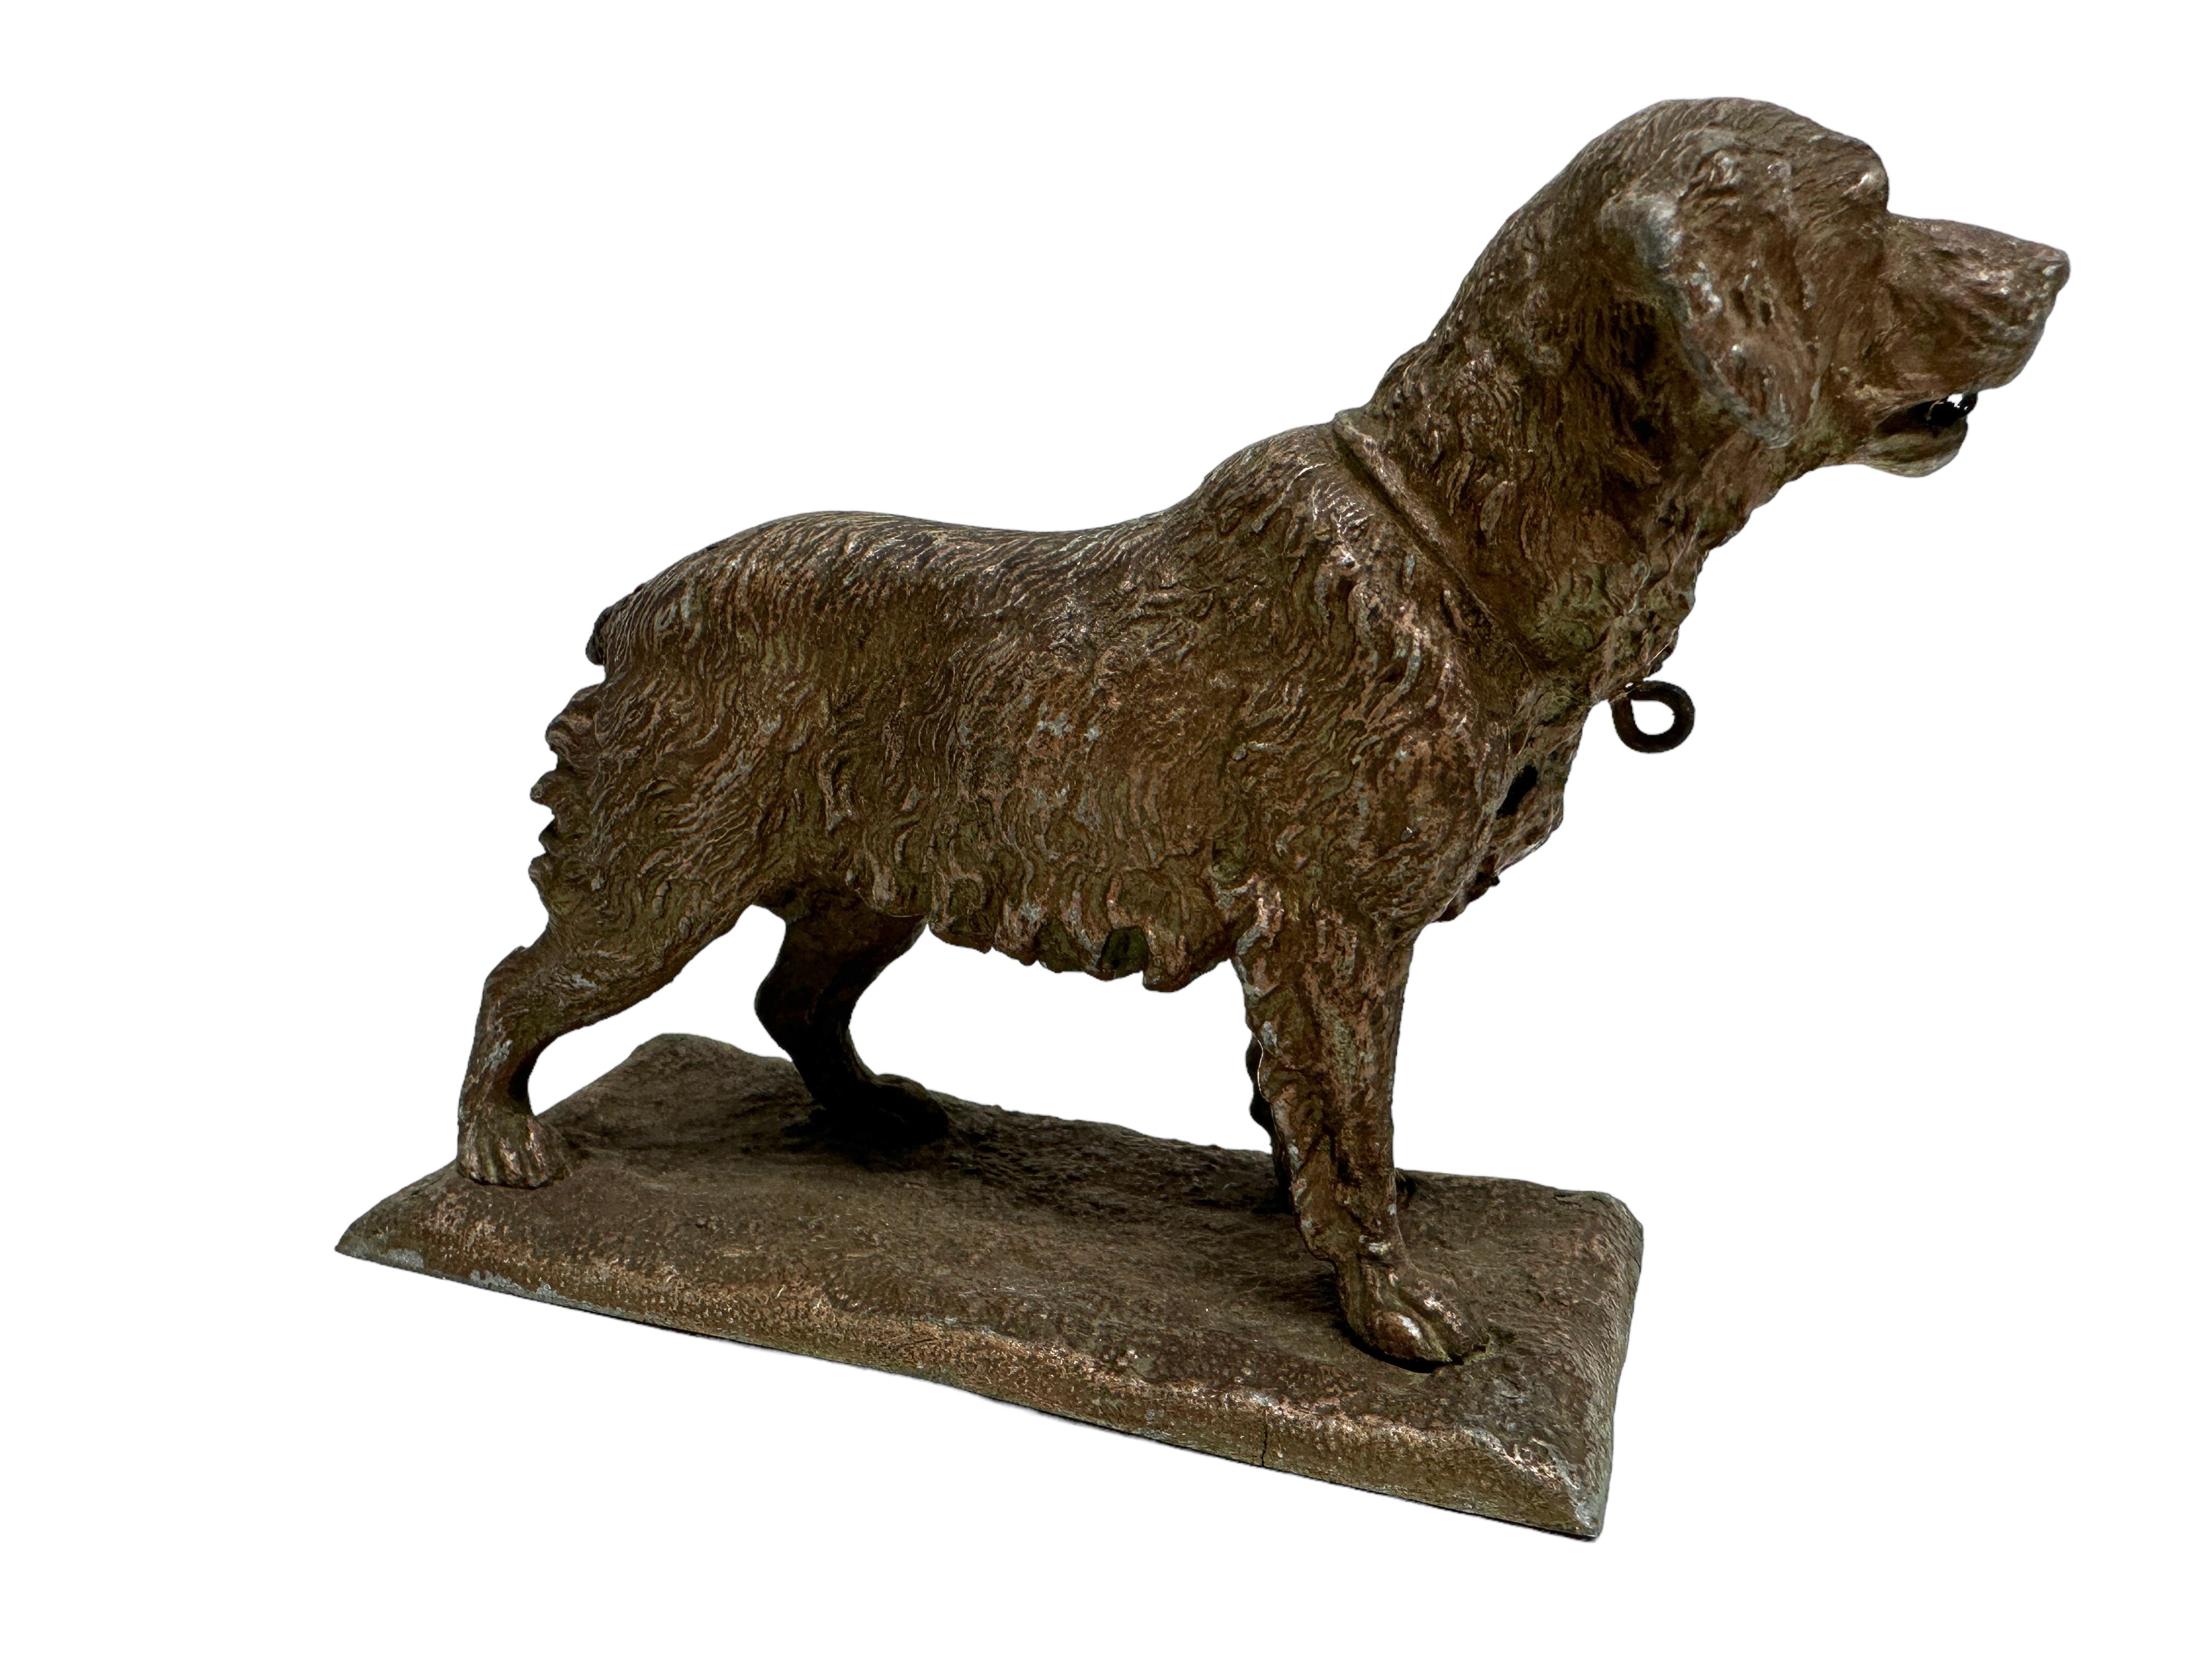 An antique decorative dog figure. Made of metal. A nice original antique item for displaying or just to use on your table. It is in the original as found condition. This piece has a beautiful patina and is in very good condition.